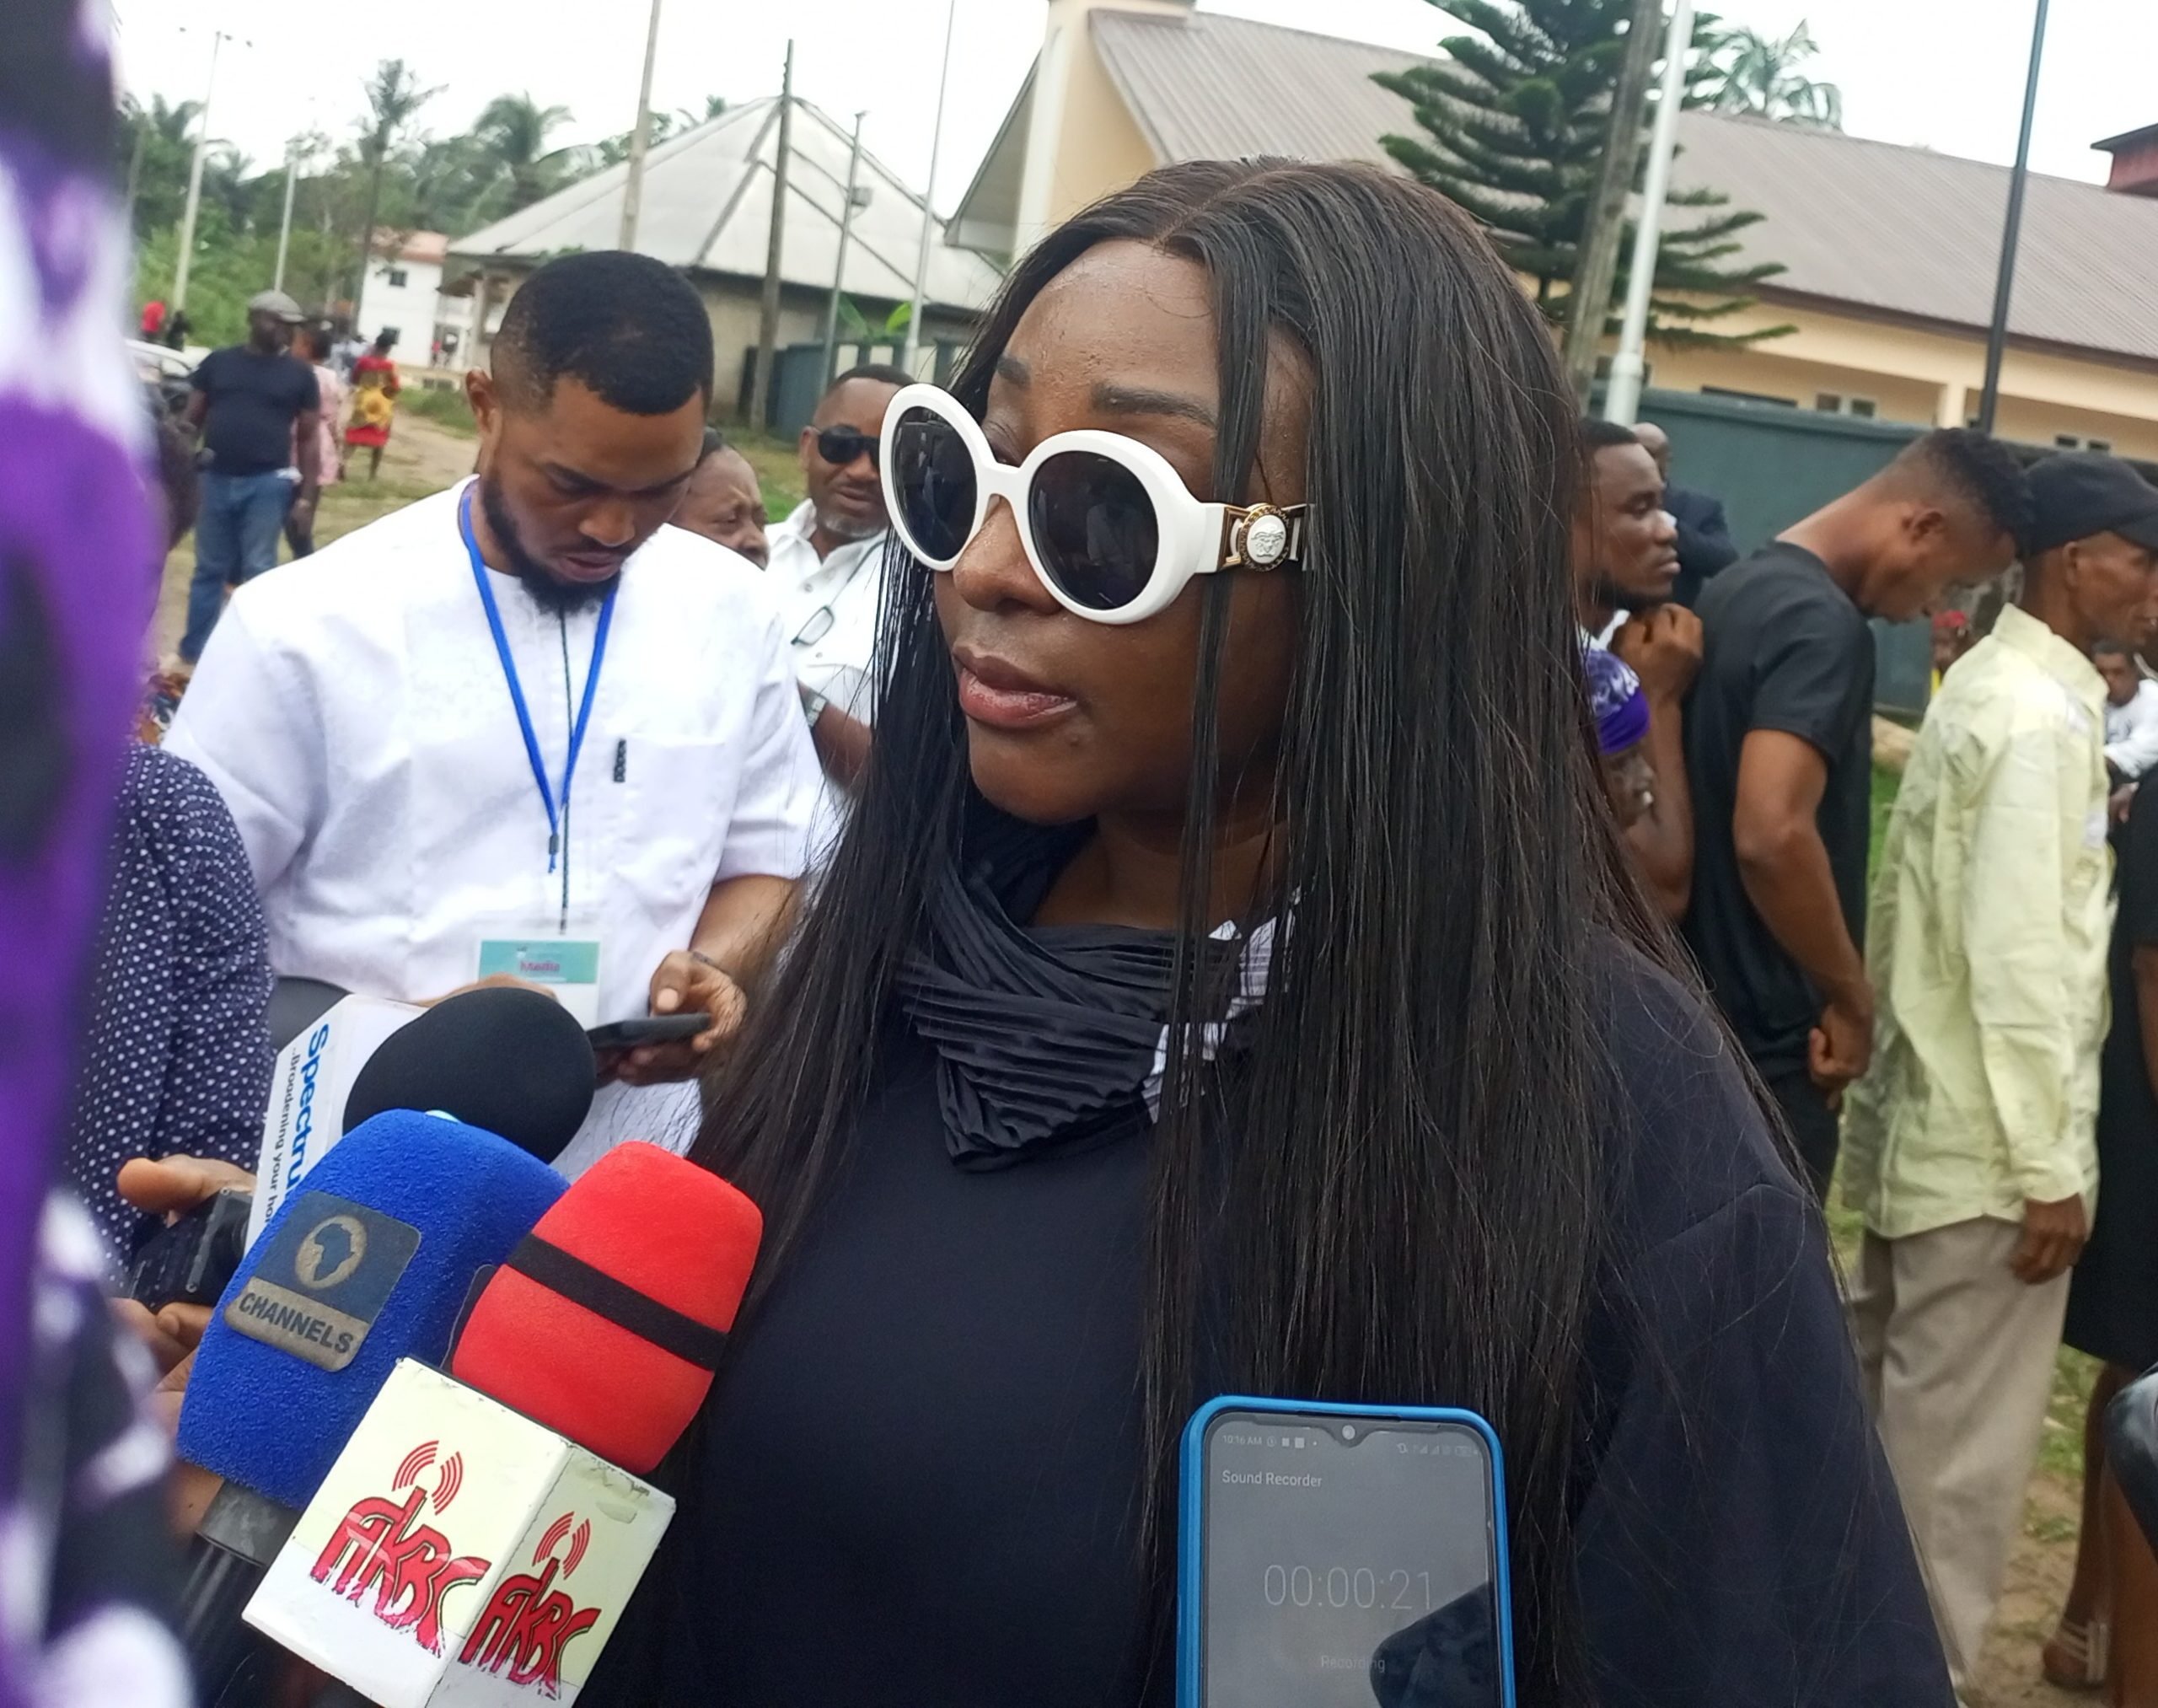 Guber elections: Ini Edo tasks INEC on accountability in results collation